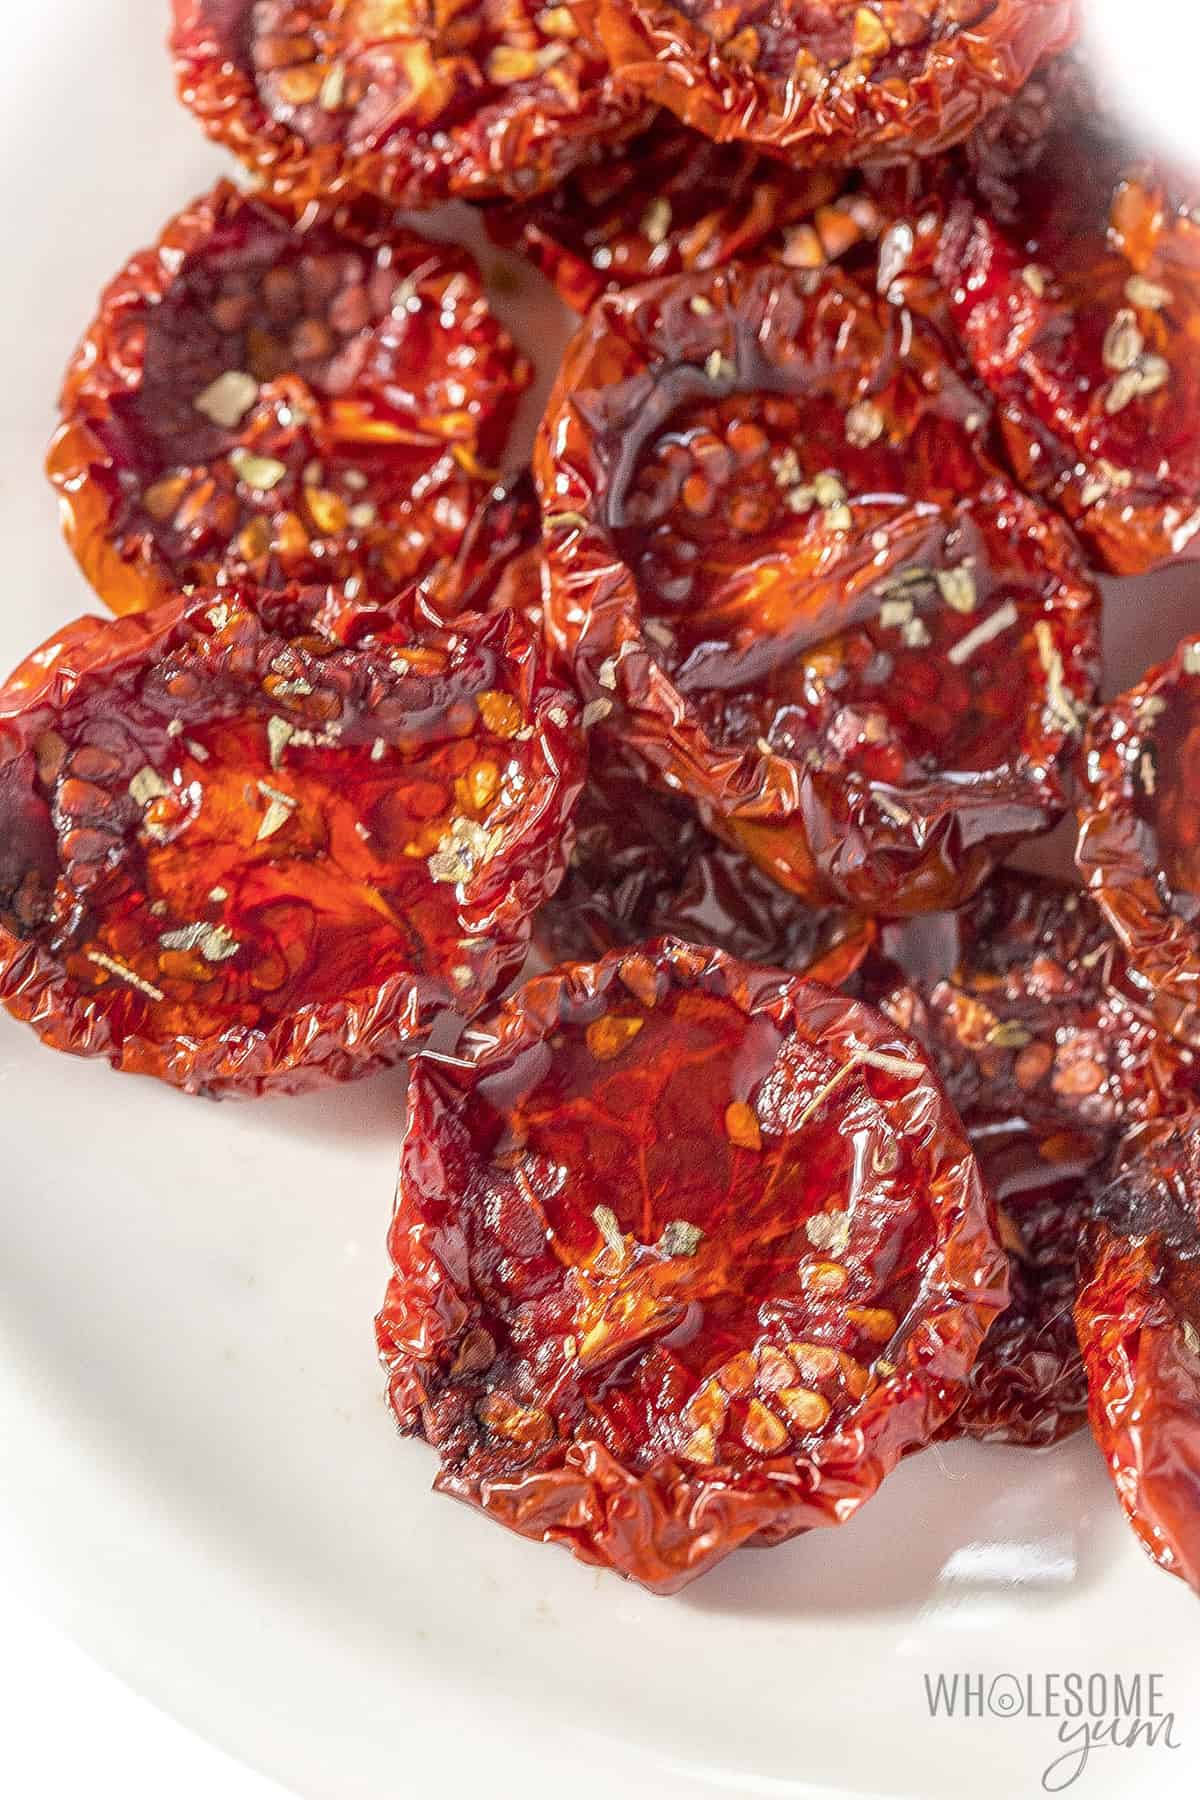 How To Make Sun-Dried Tomatoes